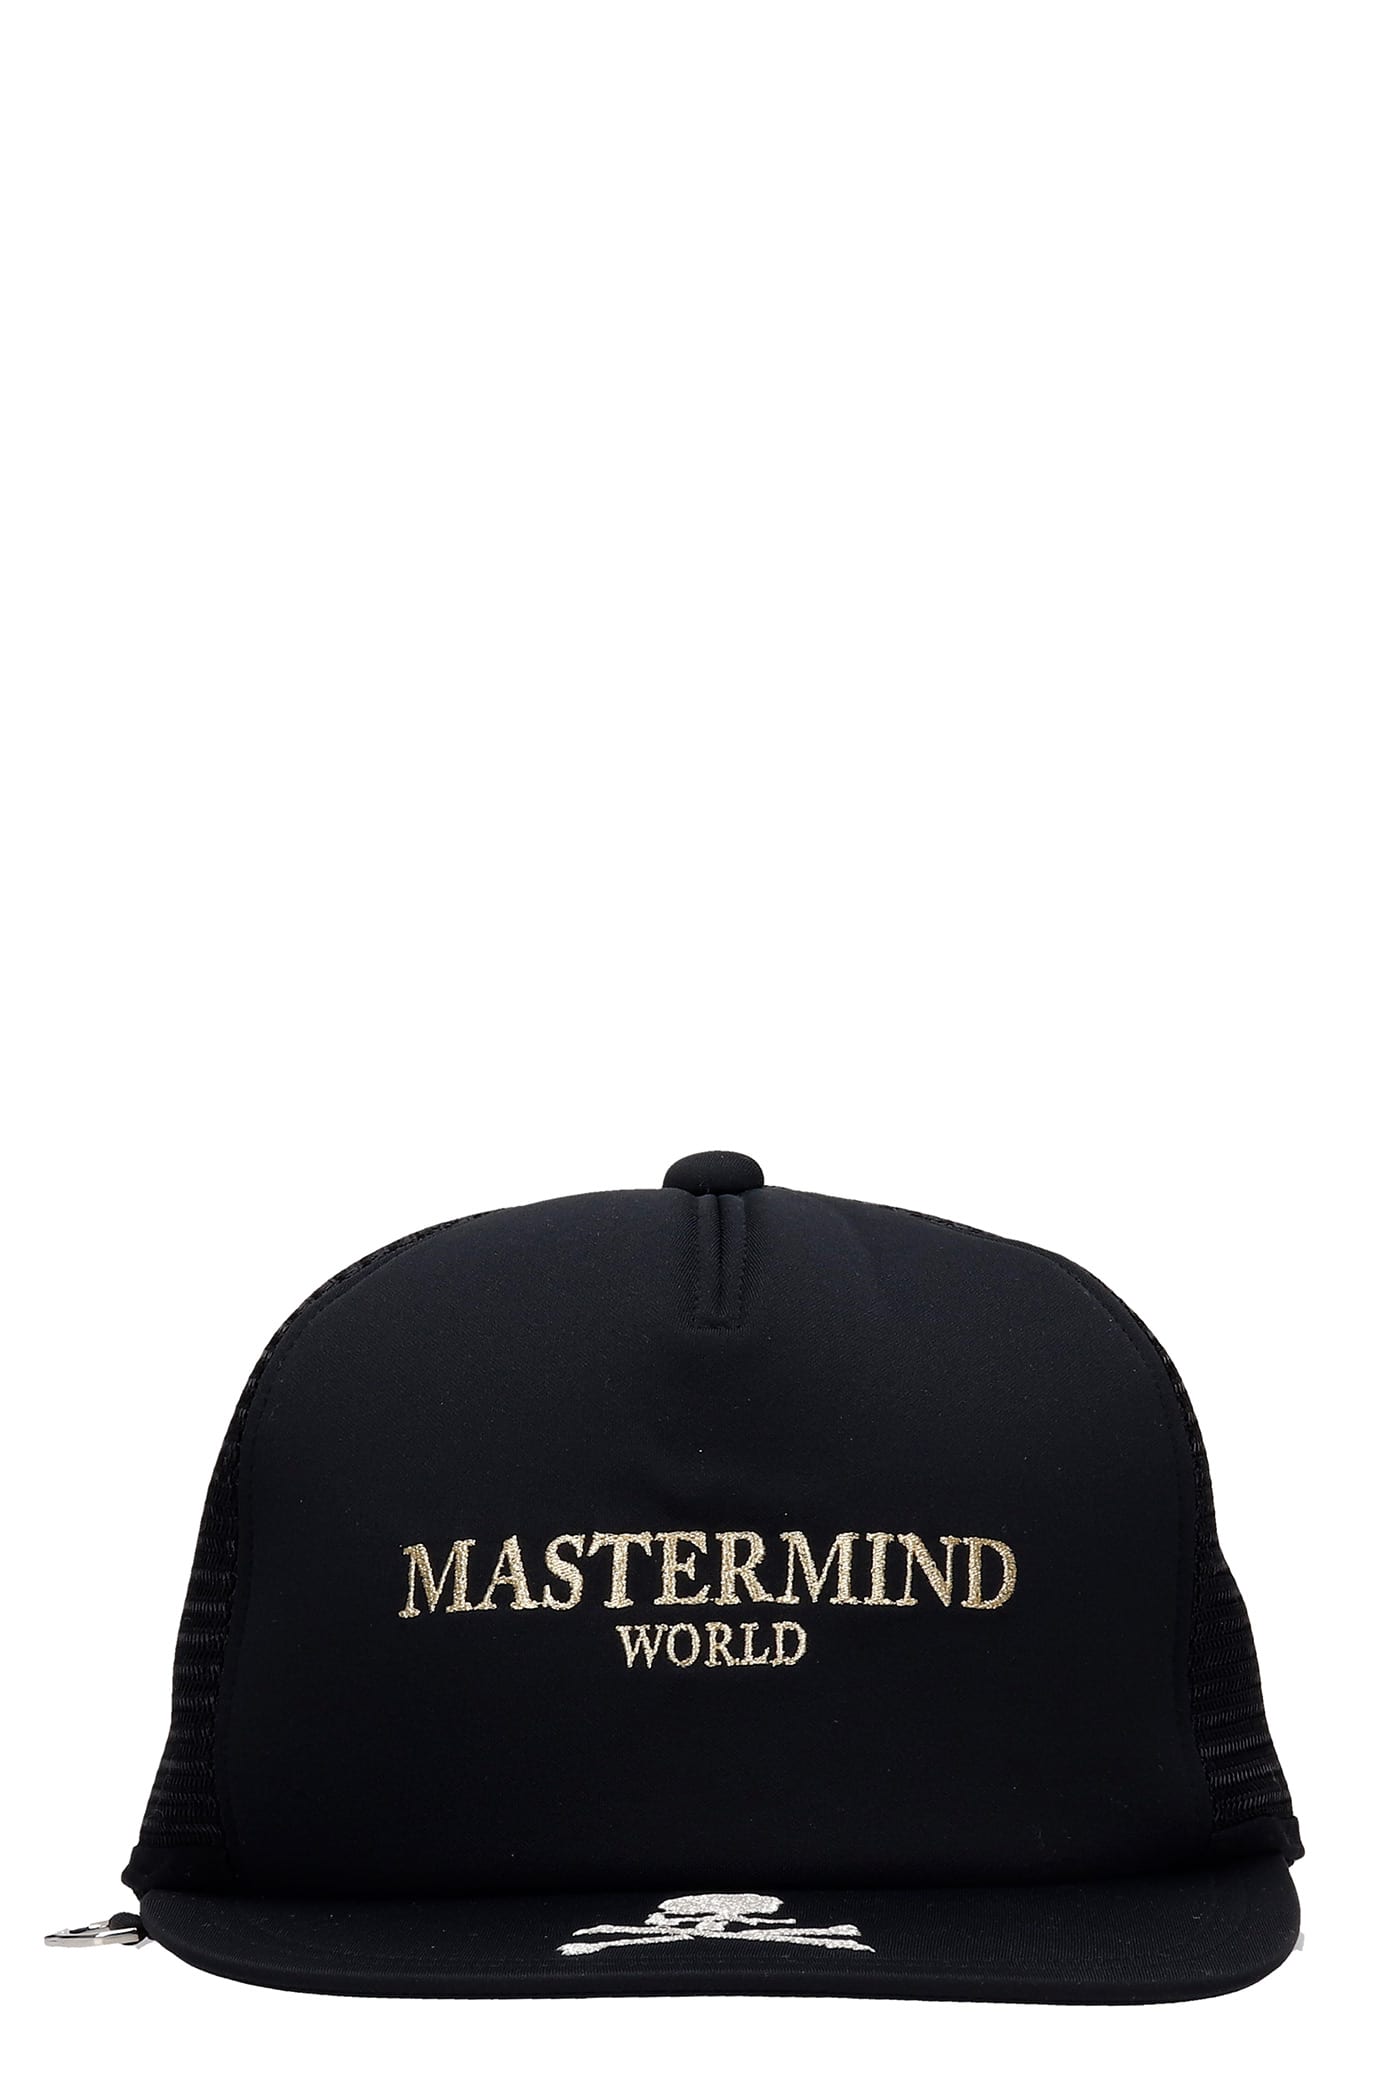 Mastermind Japan Hats In Black Polyester